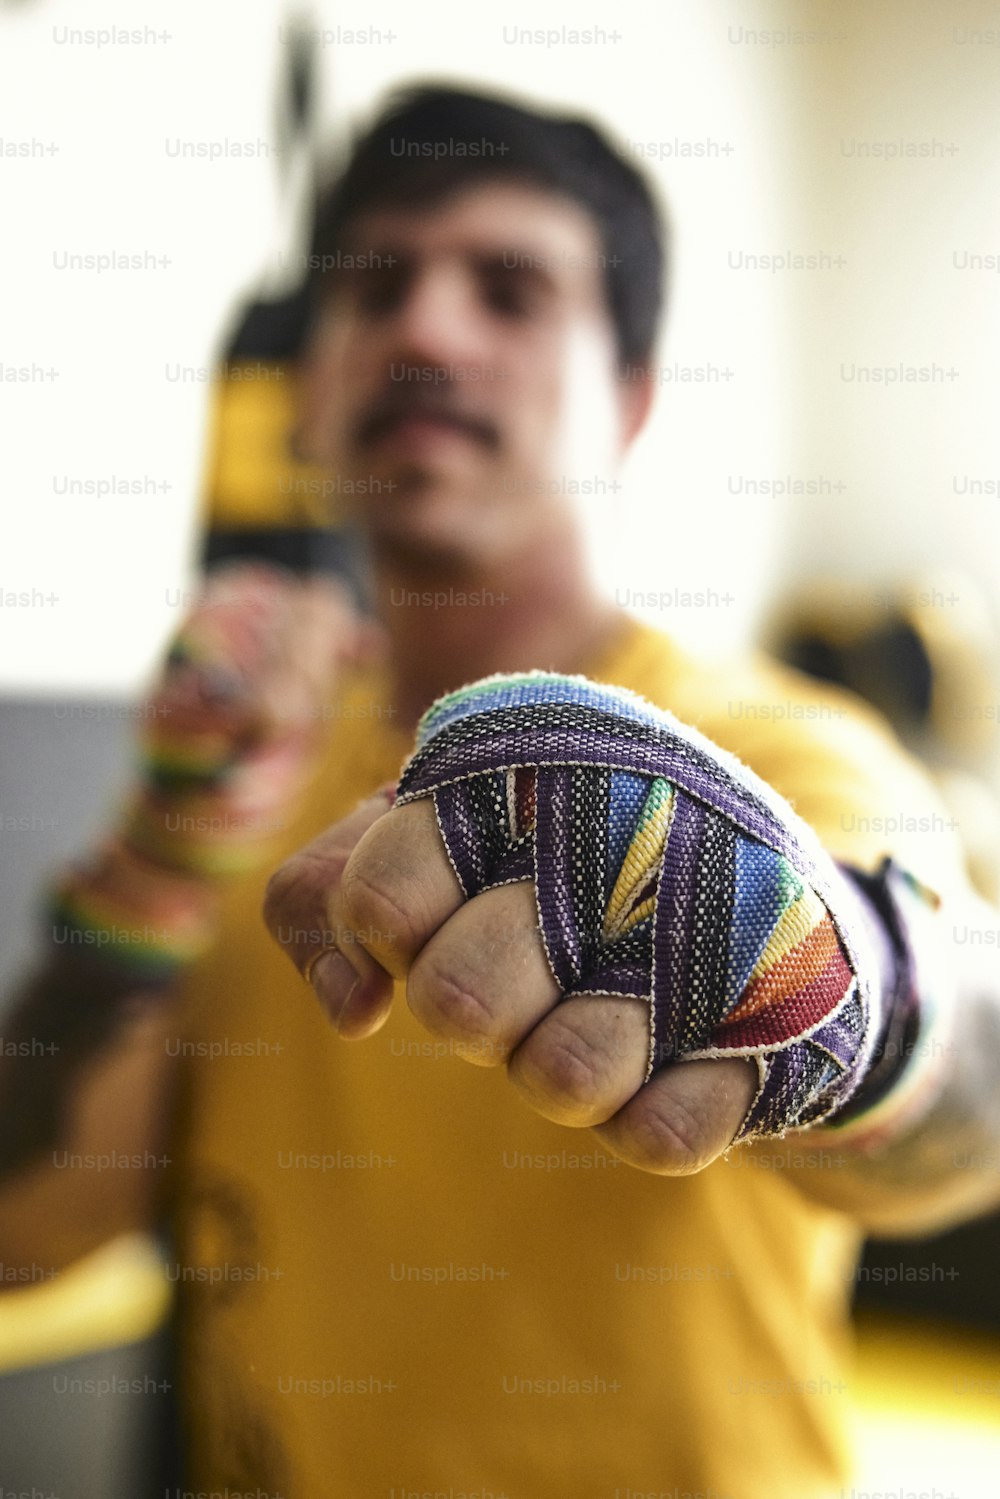 a man holding a colorful object in his hand